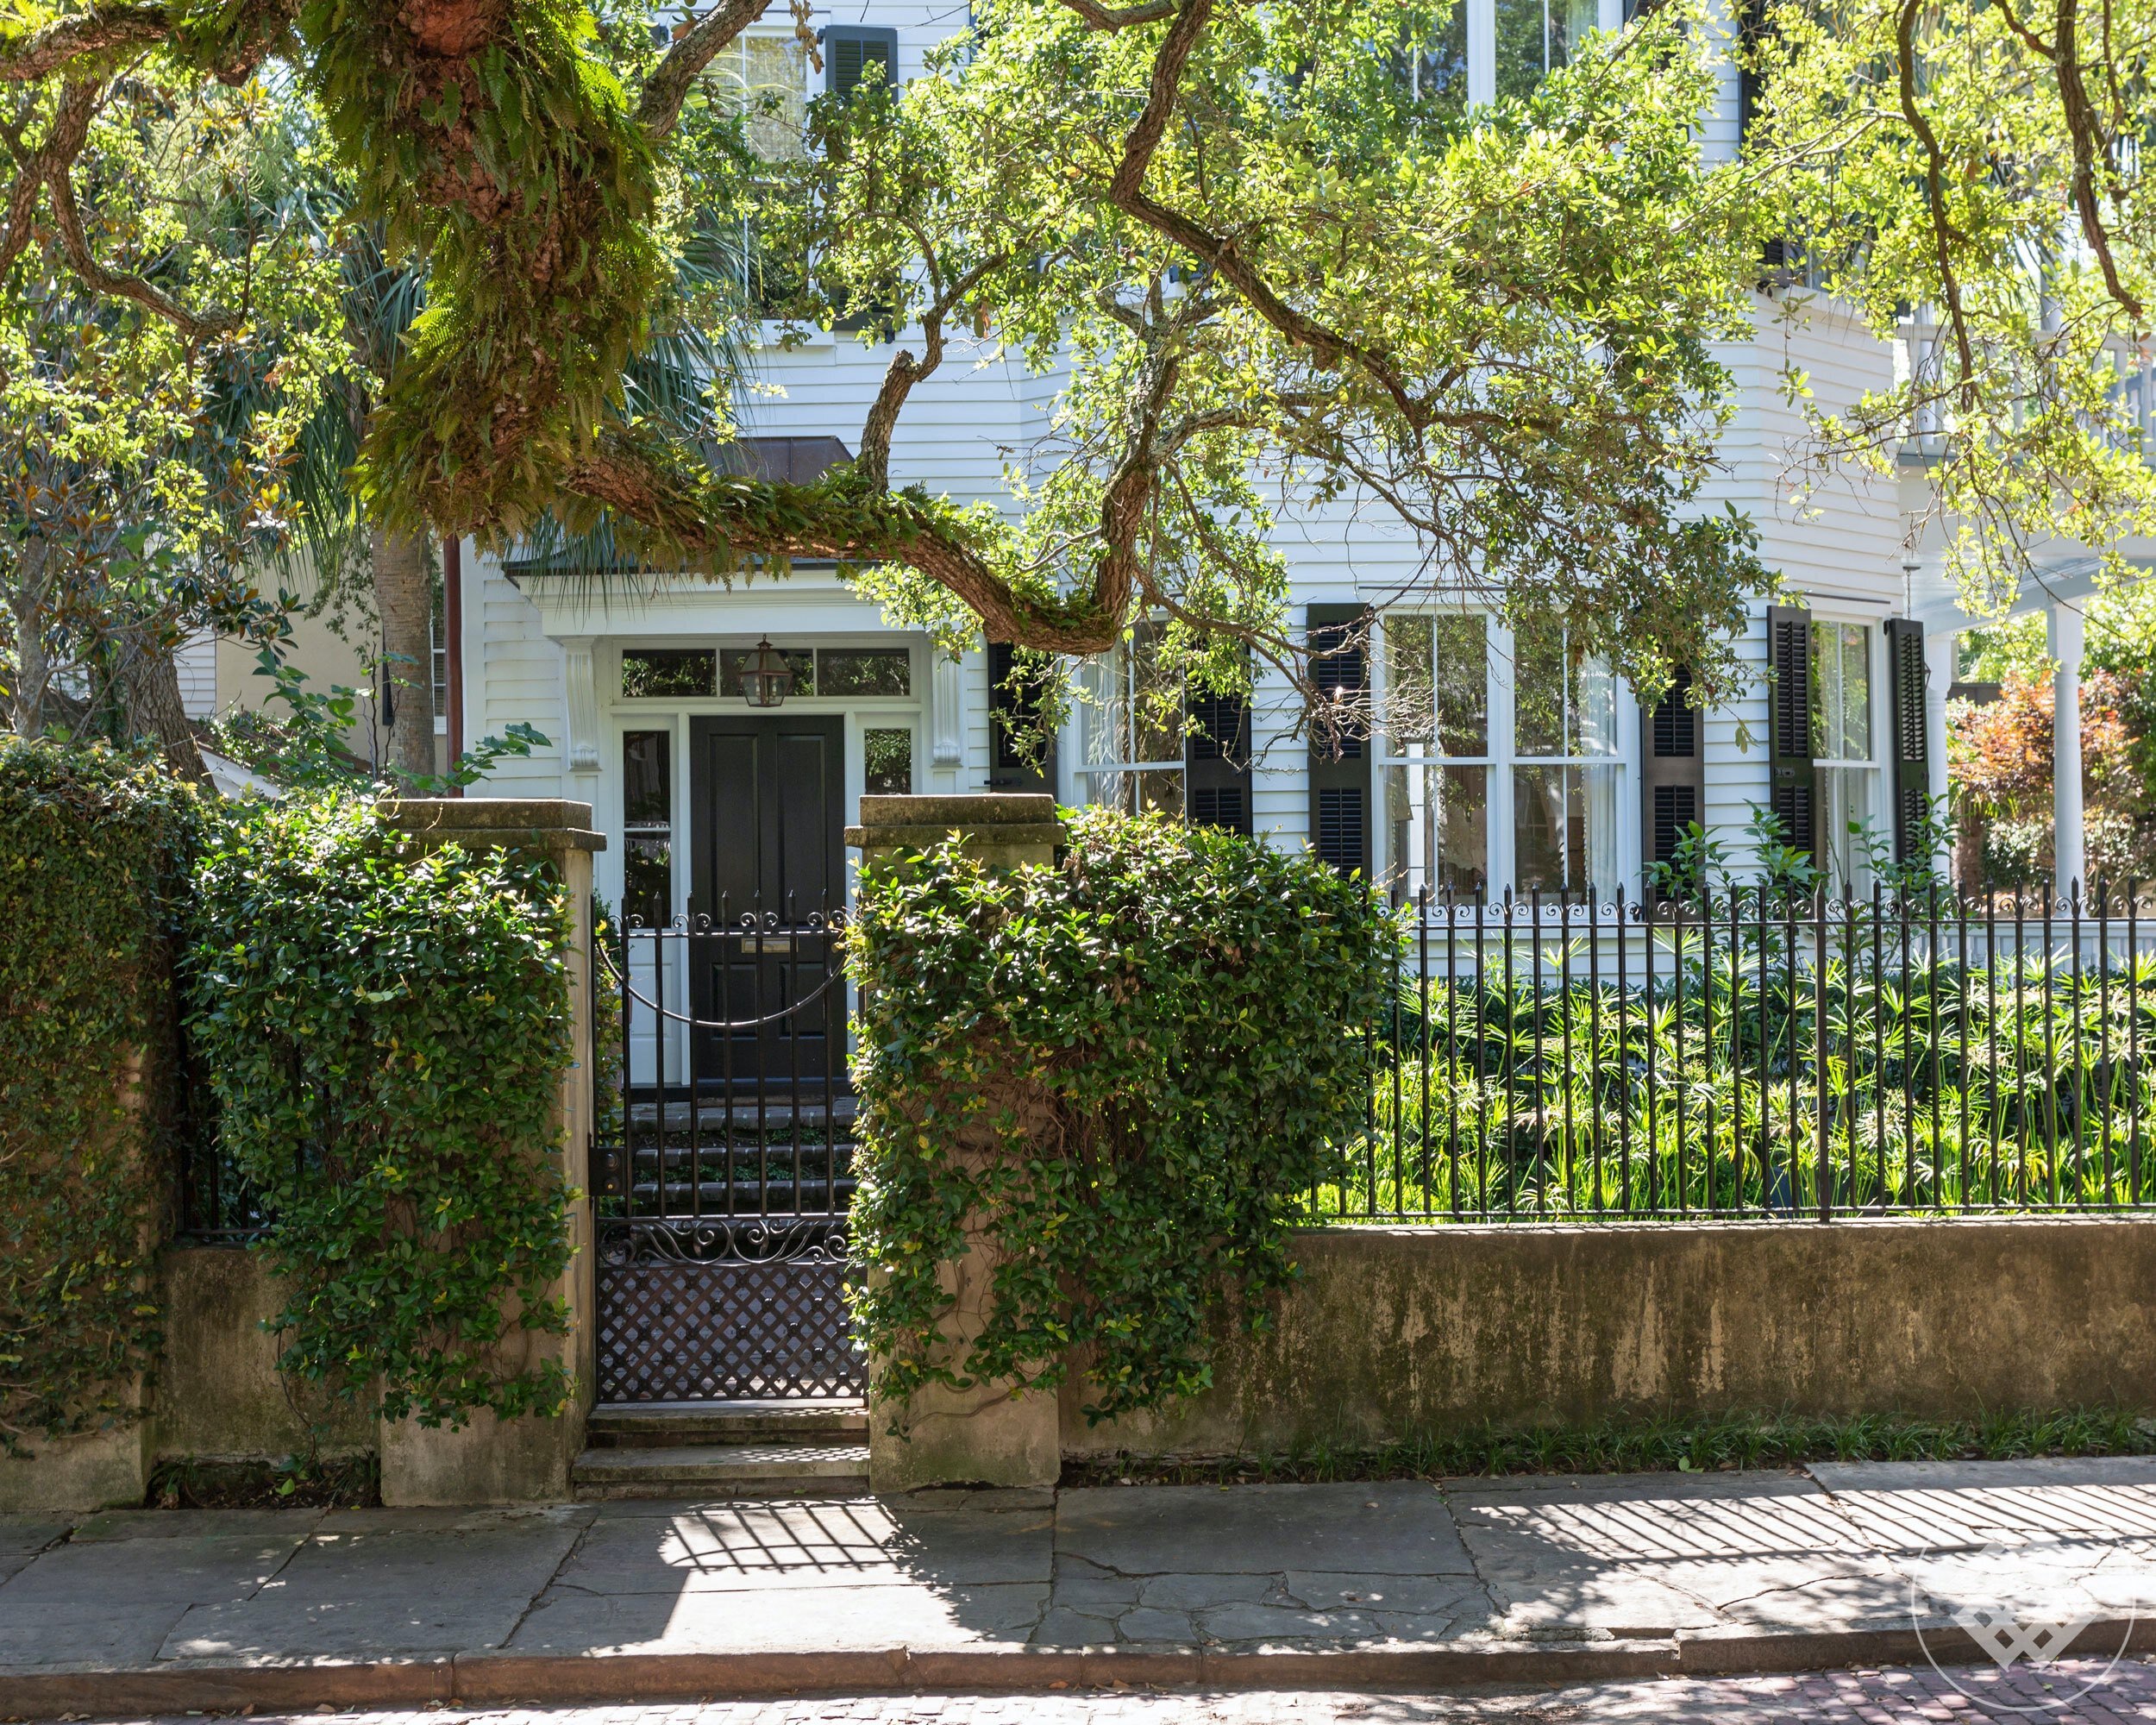 shc-25-welcoming-charleston-historic-district-home-renovated-by-architect-beau-clowney-and-interior-designer-melissa-ervin.jpg